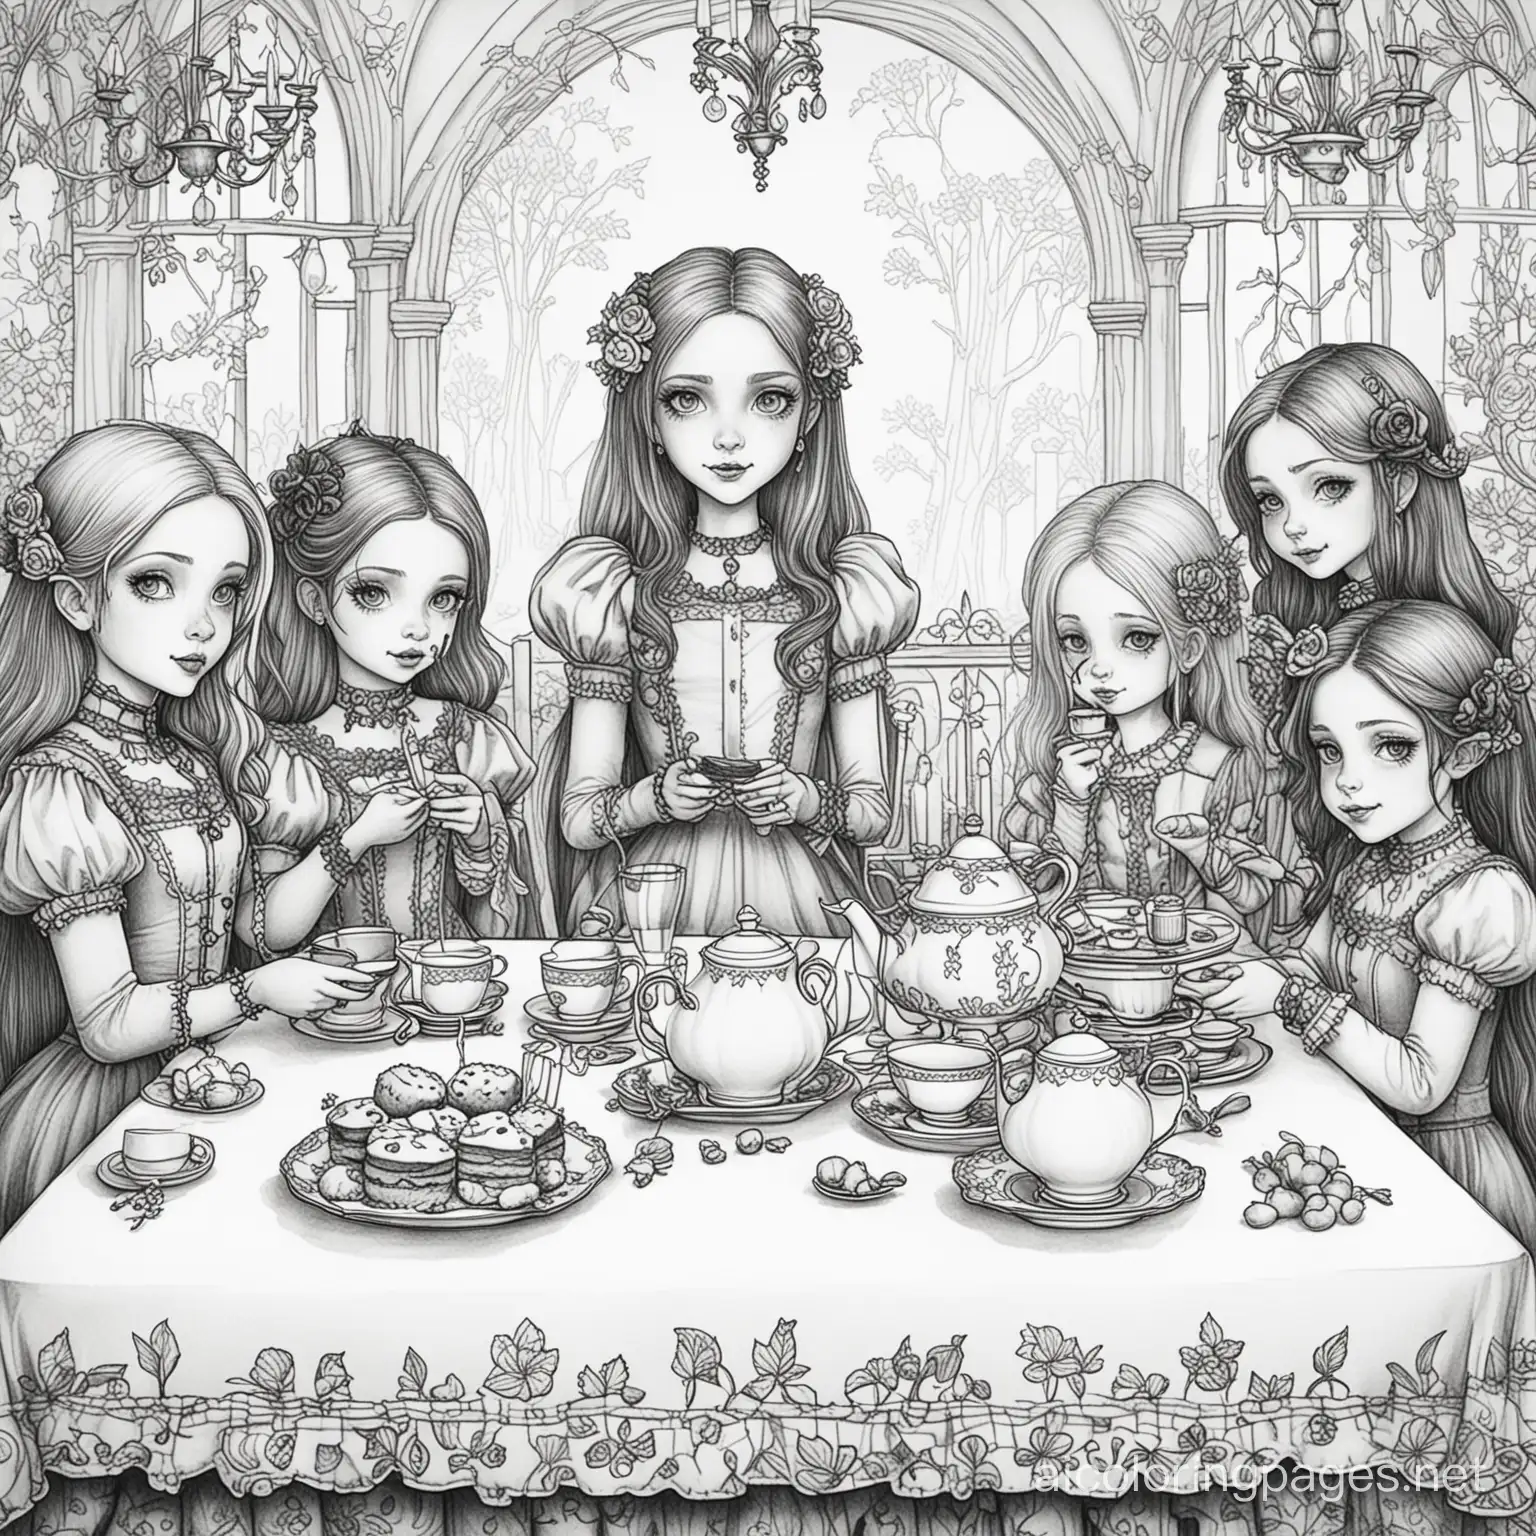 gothic tea party, Coloring Page, black and white, line art, white background, Simplicity, Ample White Space. The background of the coloring page is plain white to make it easy for young children to color within the lines. The outlines of all the subjects are easy to distinguish, making it simple for kids to color without too much difficulty